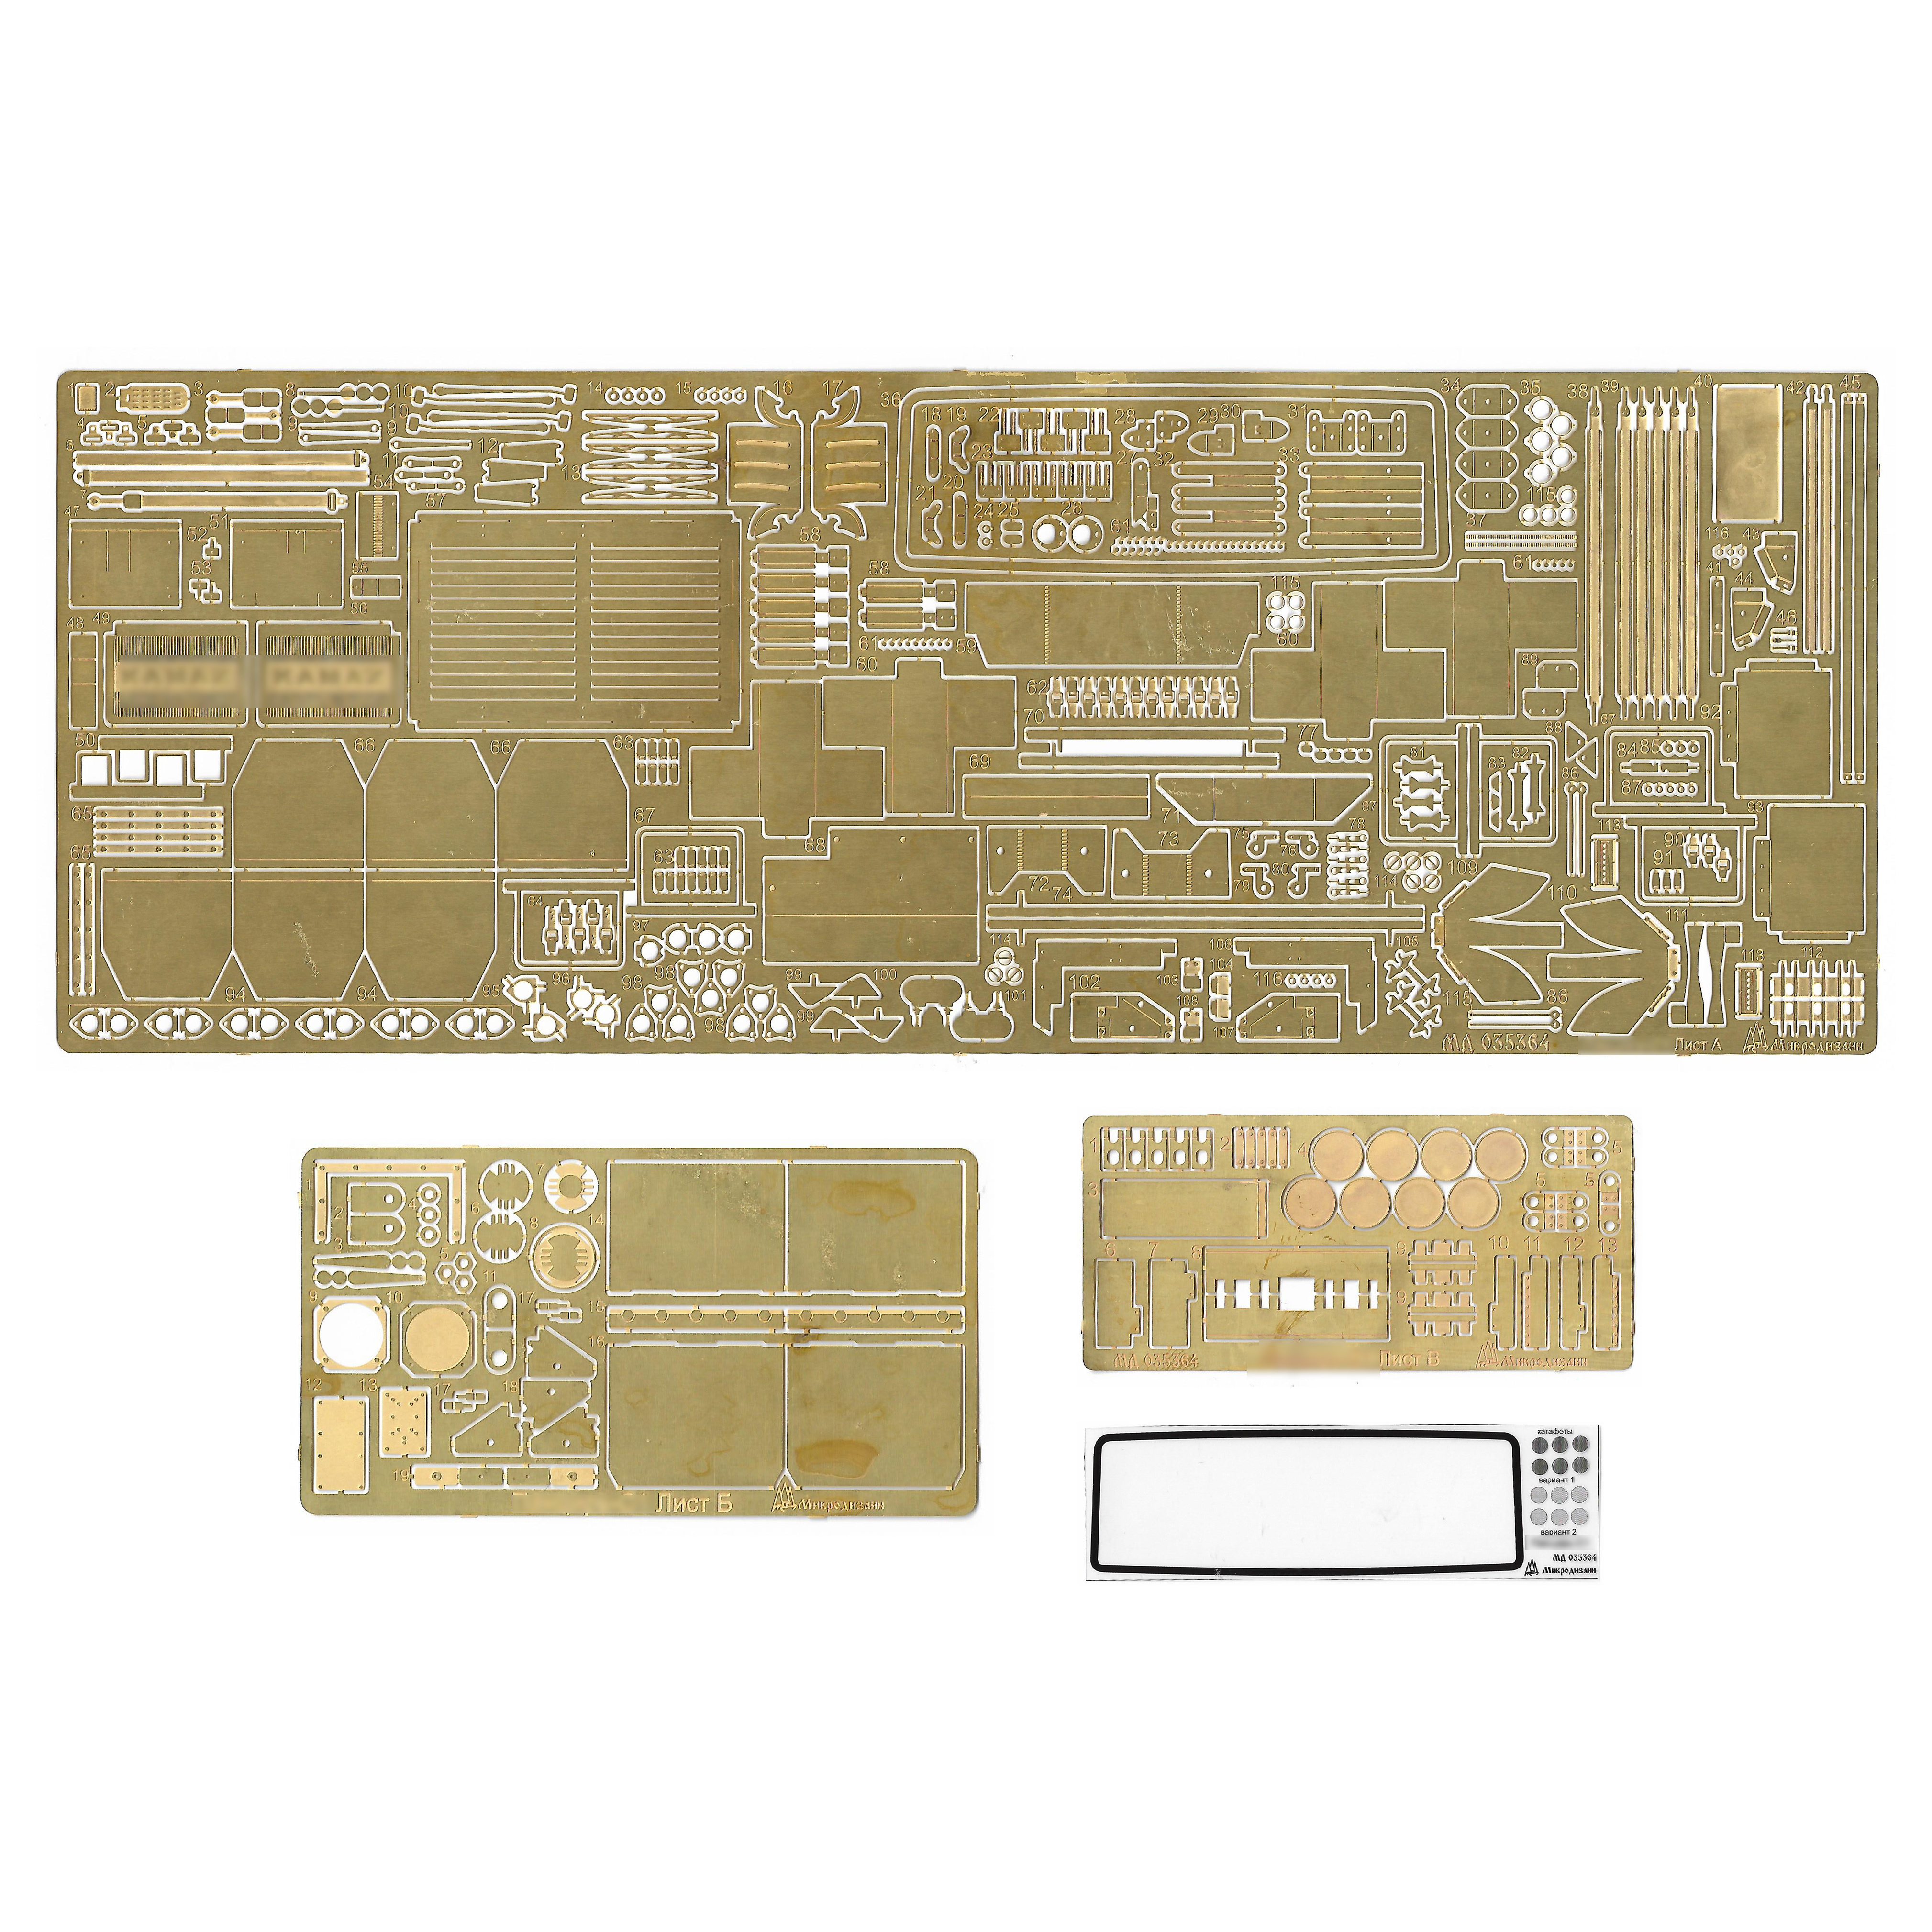 035364 Microdesign 1/35 Kit of photo-etched parts for zrpk (basic set) from the Zvezda